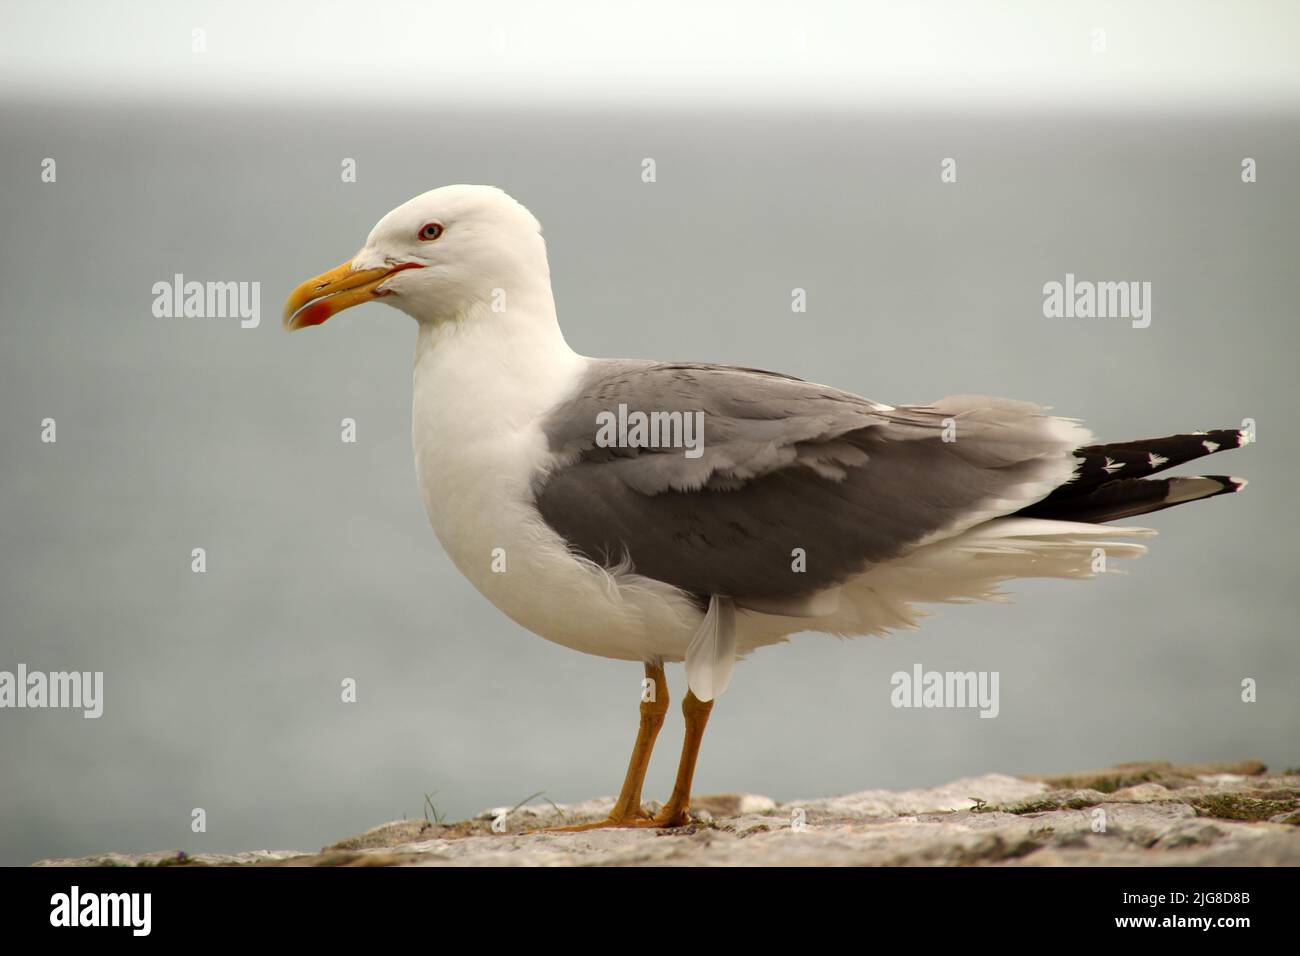 A closeup of white headed seagull standing on wall in gray background Stock Photo